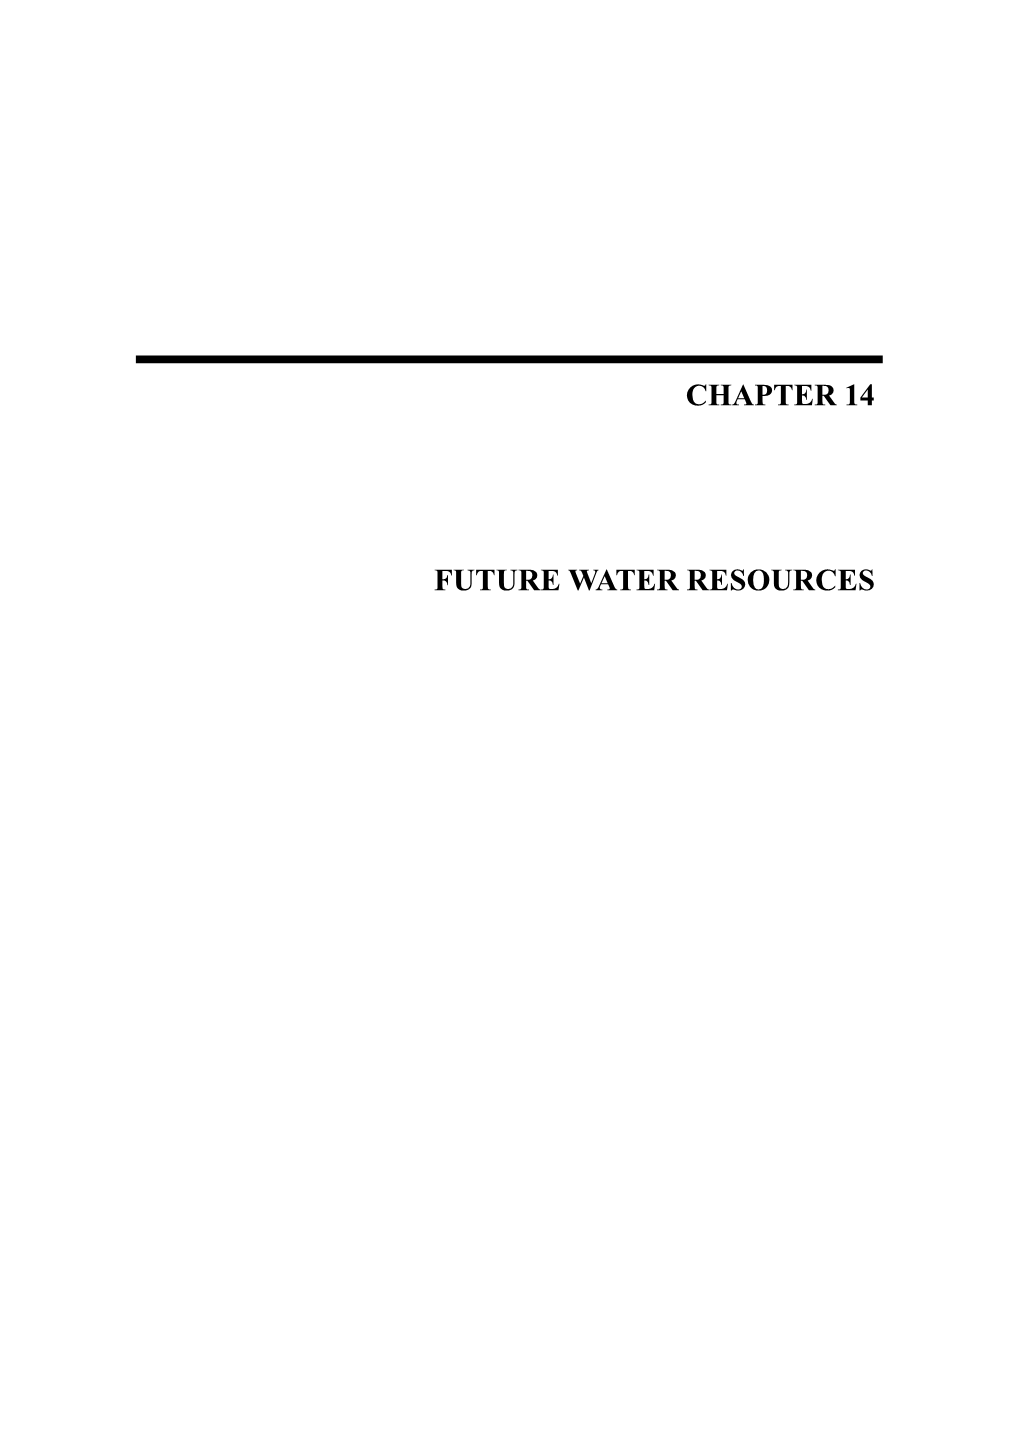 Chapter 14 Future Water Resources